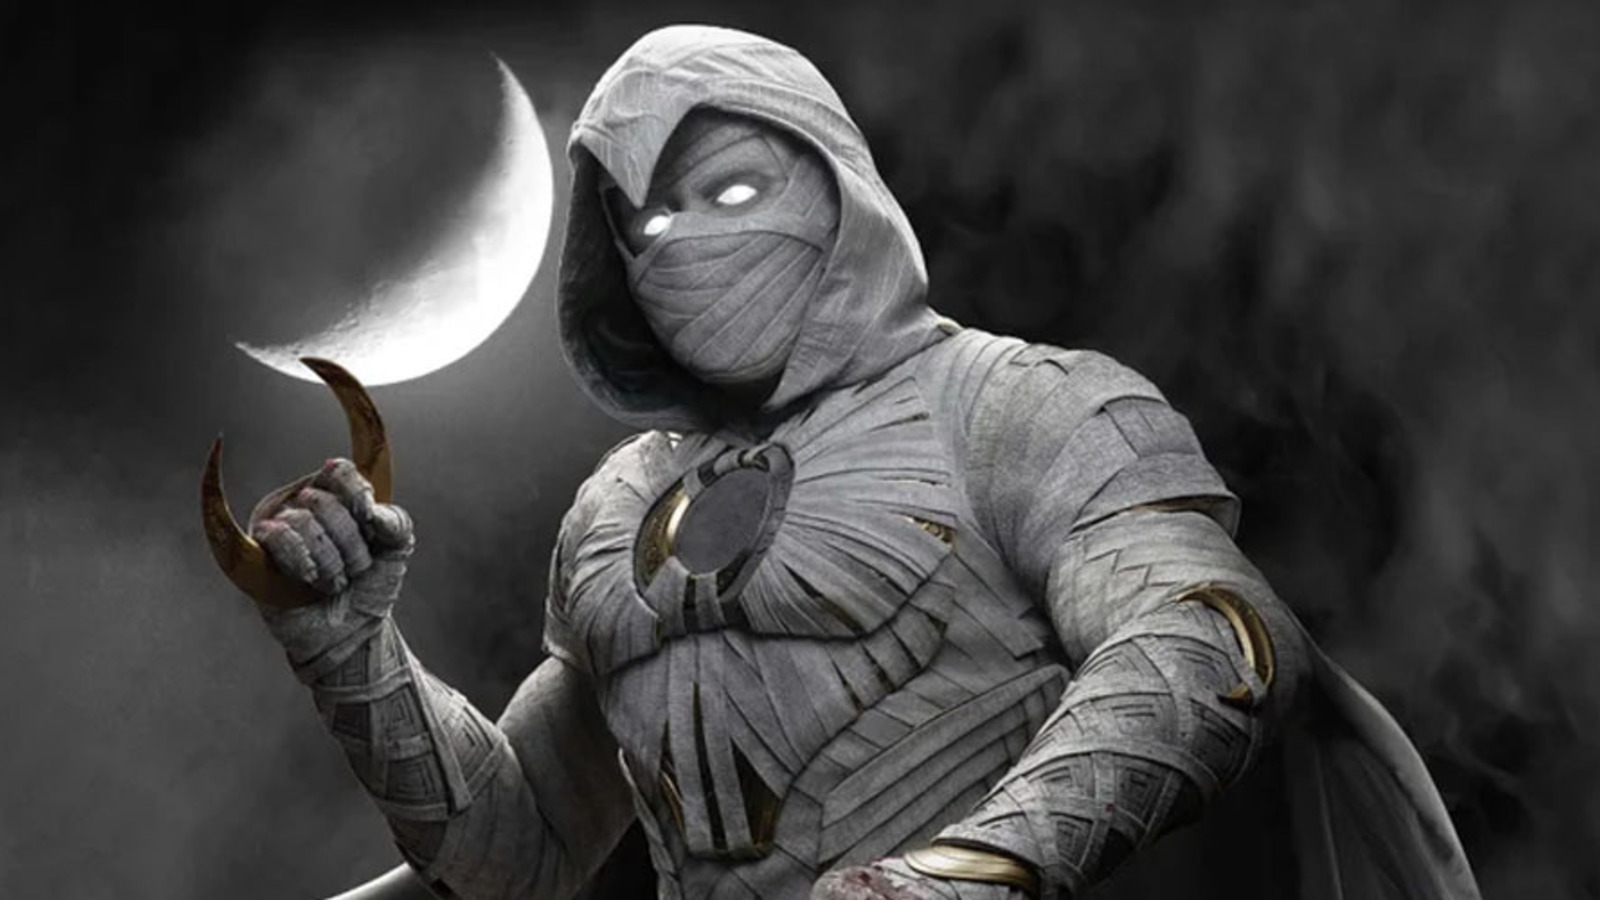 How To Make A Moon Knight Cosplay From The New Marvel Show